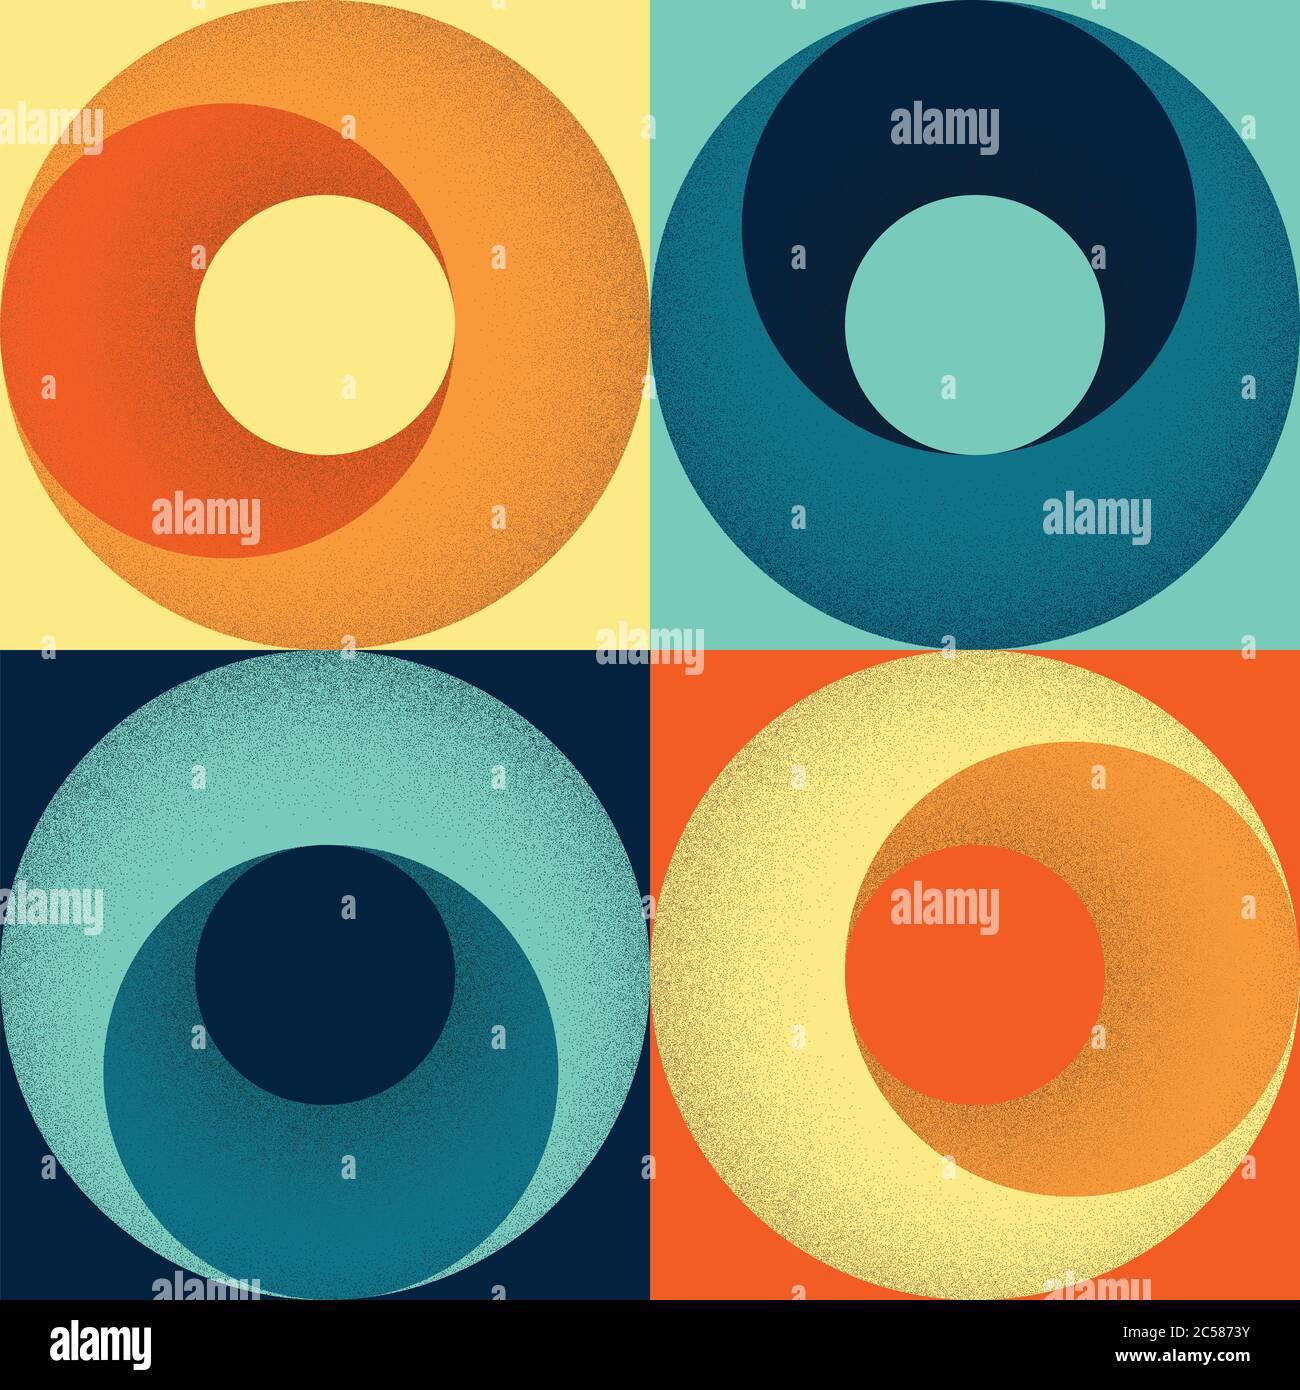 Seamless 1960s or 70s style geometric pattern of squares and circles with stippled shading. Retro colour scheme of yellow, orange, turquoise and navy Stock Vector